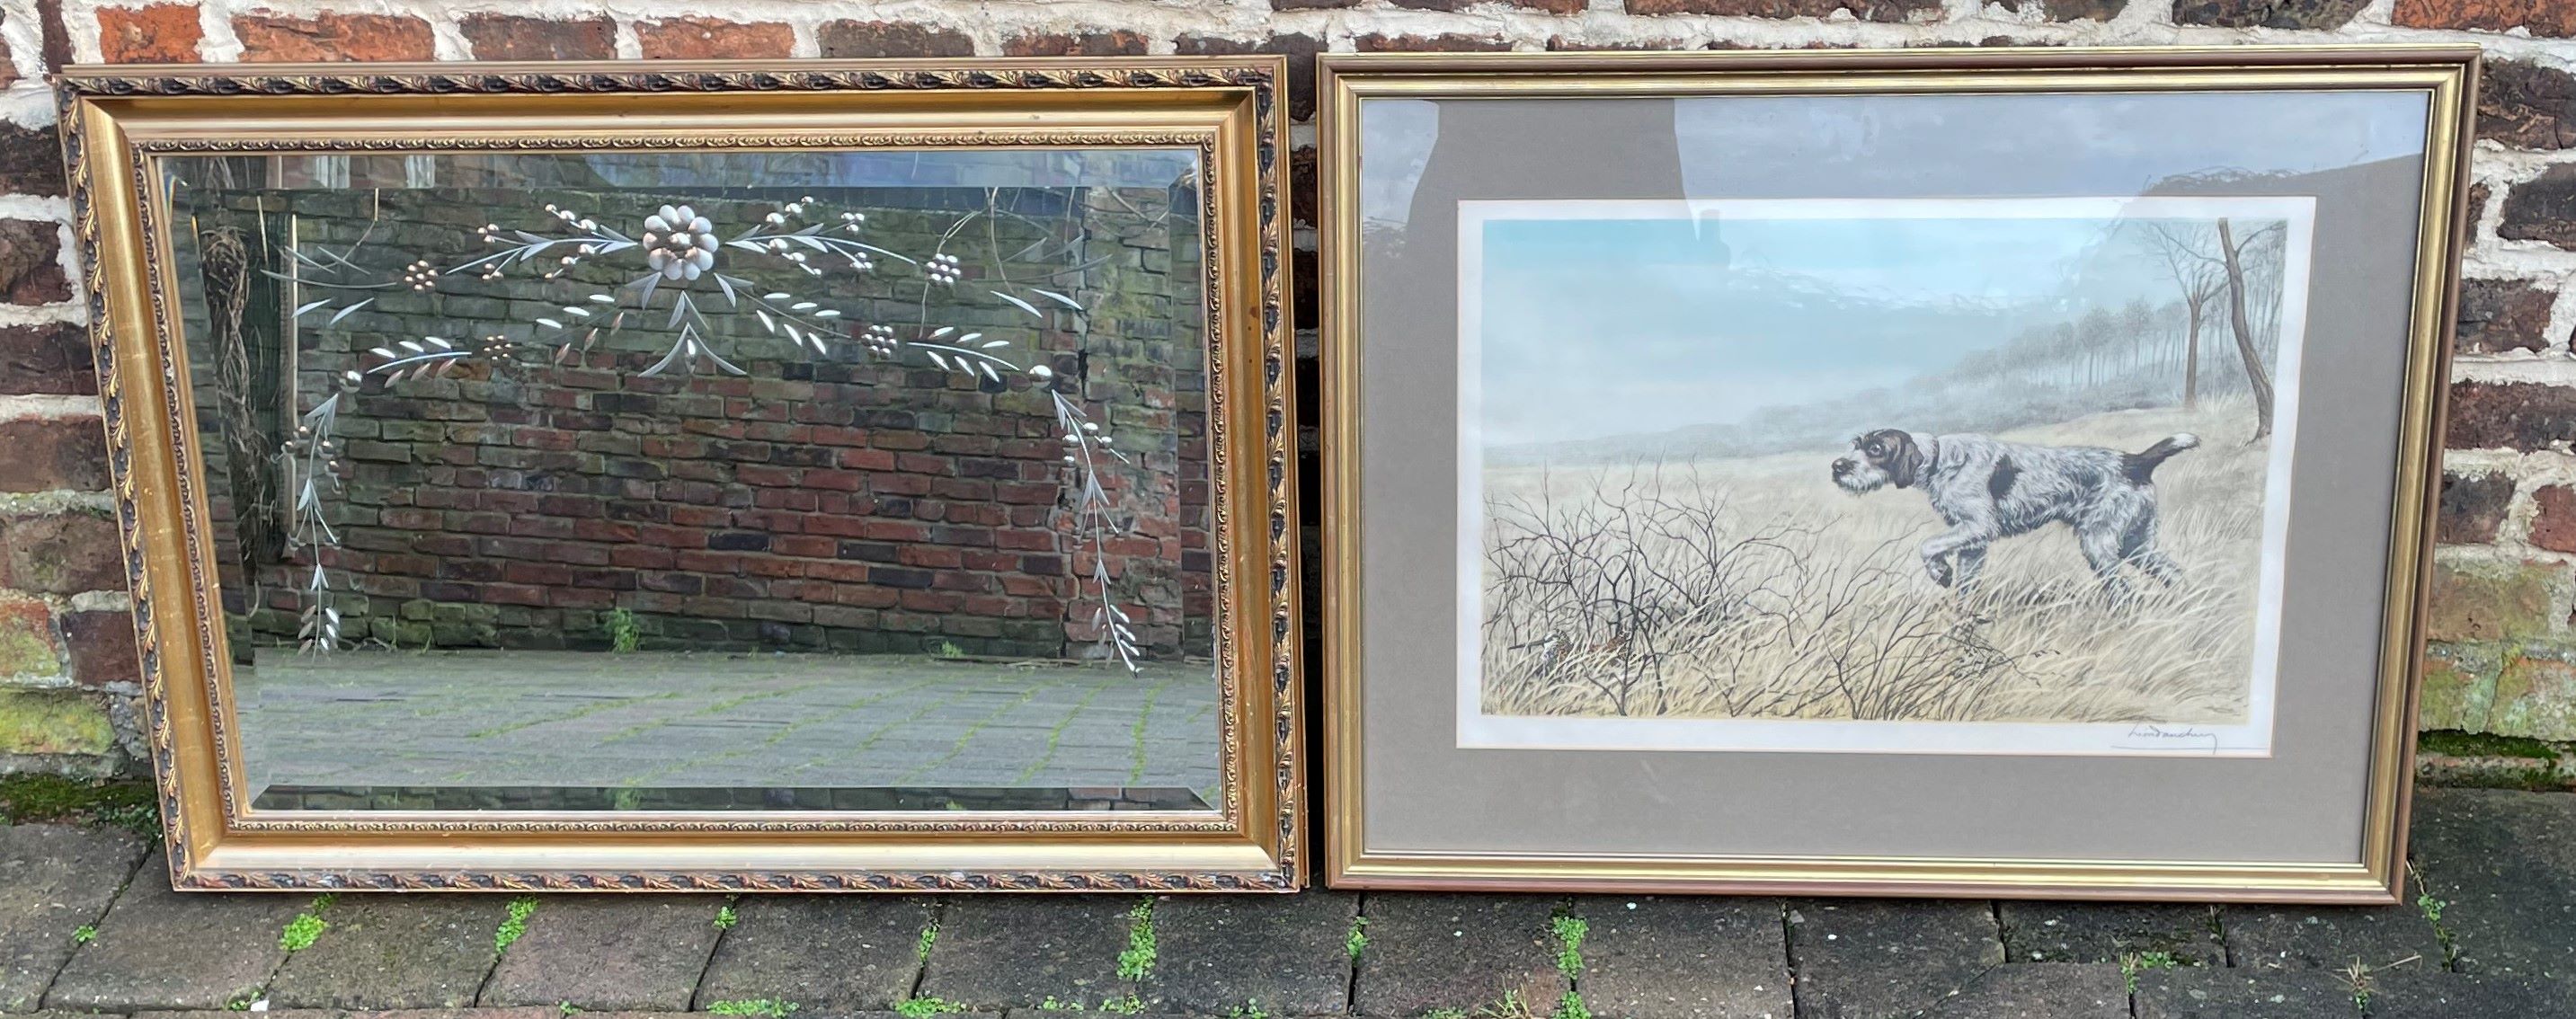 Gilt framed wall mirror & a framed hand-coloured lithographic print of a wire haired pointer